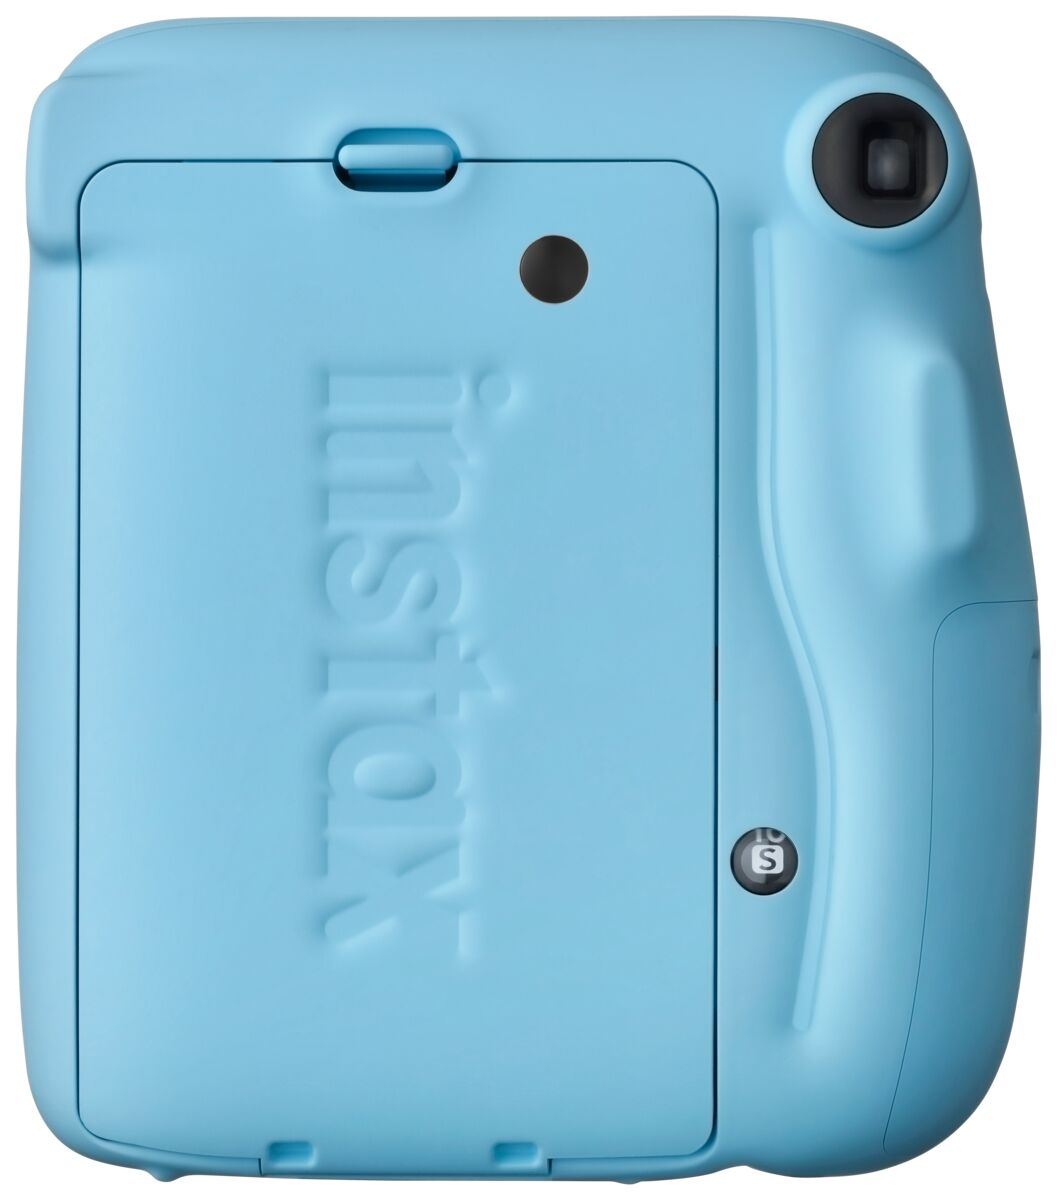 Picture of Instax Mini 11 Sky Blue